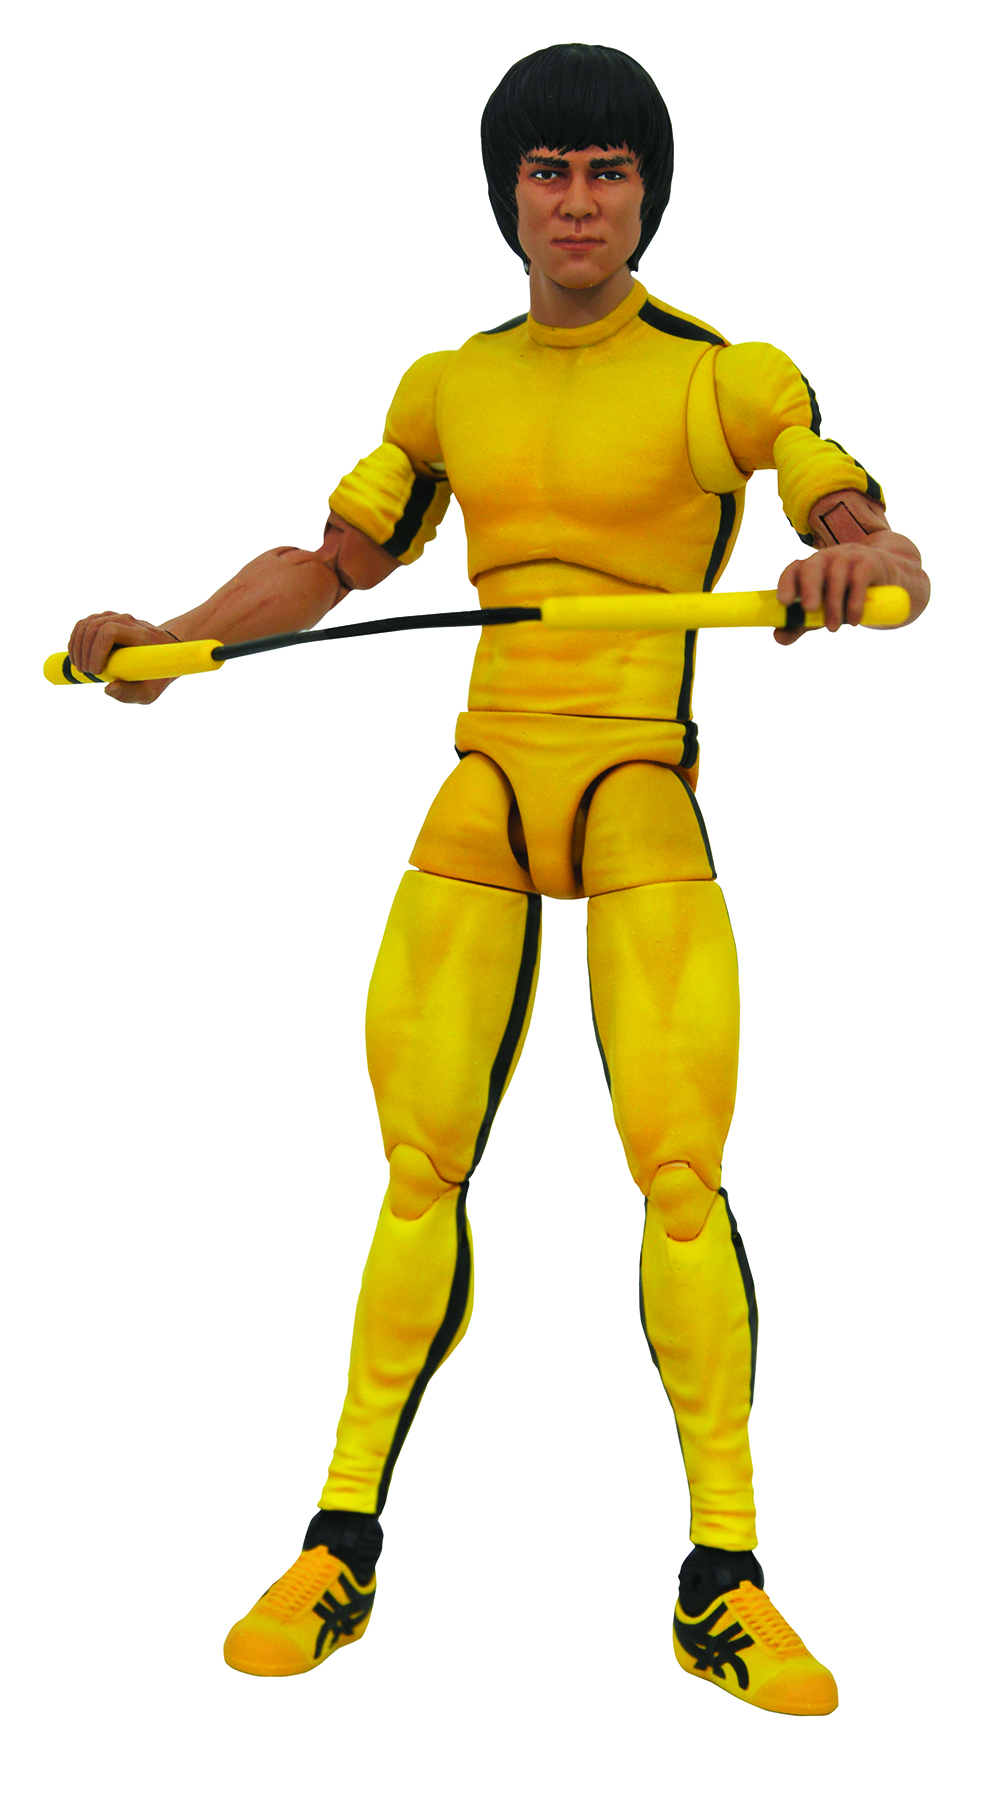 6" Bruce Lee Yellow Track Suit Action Figure Toy Doll Bandai Kid Gift Movable UK